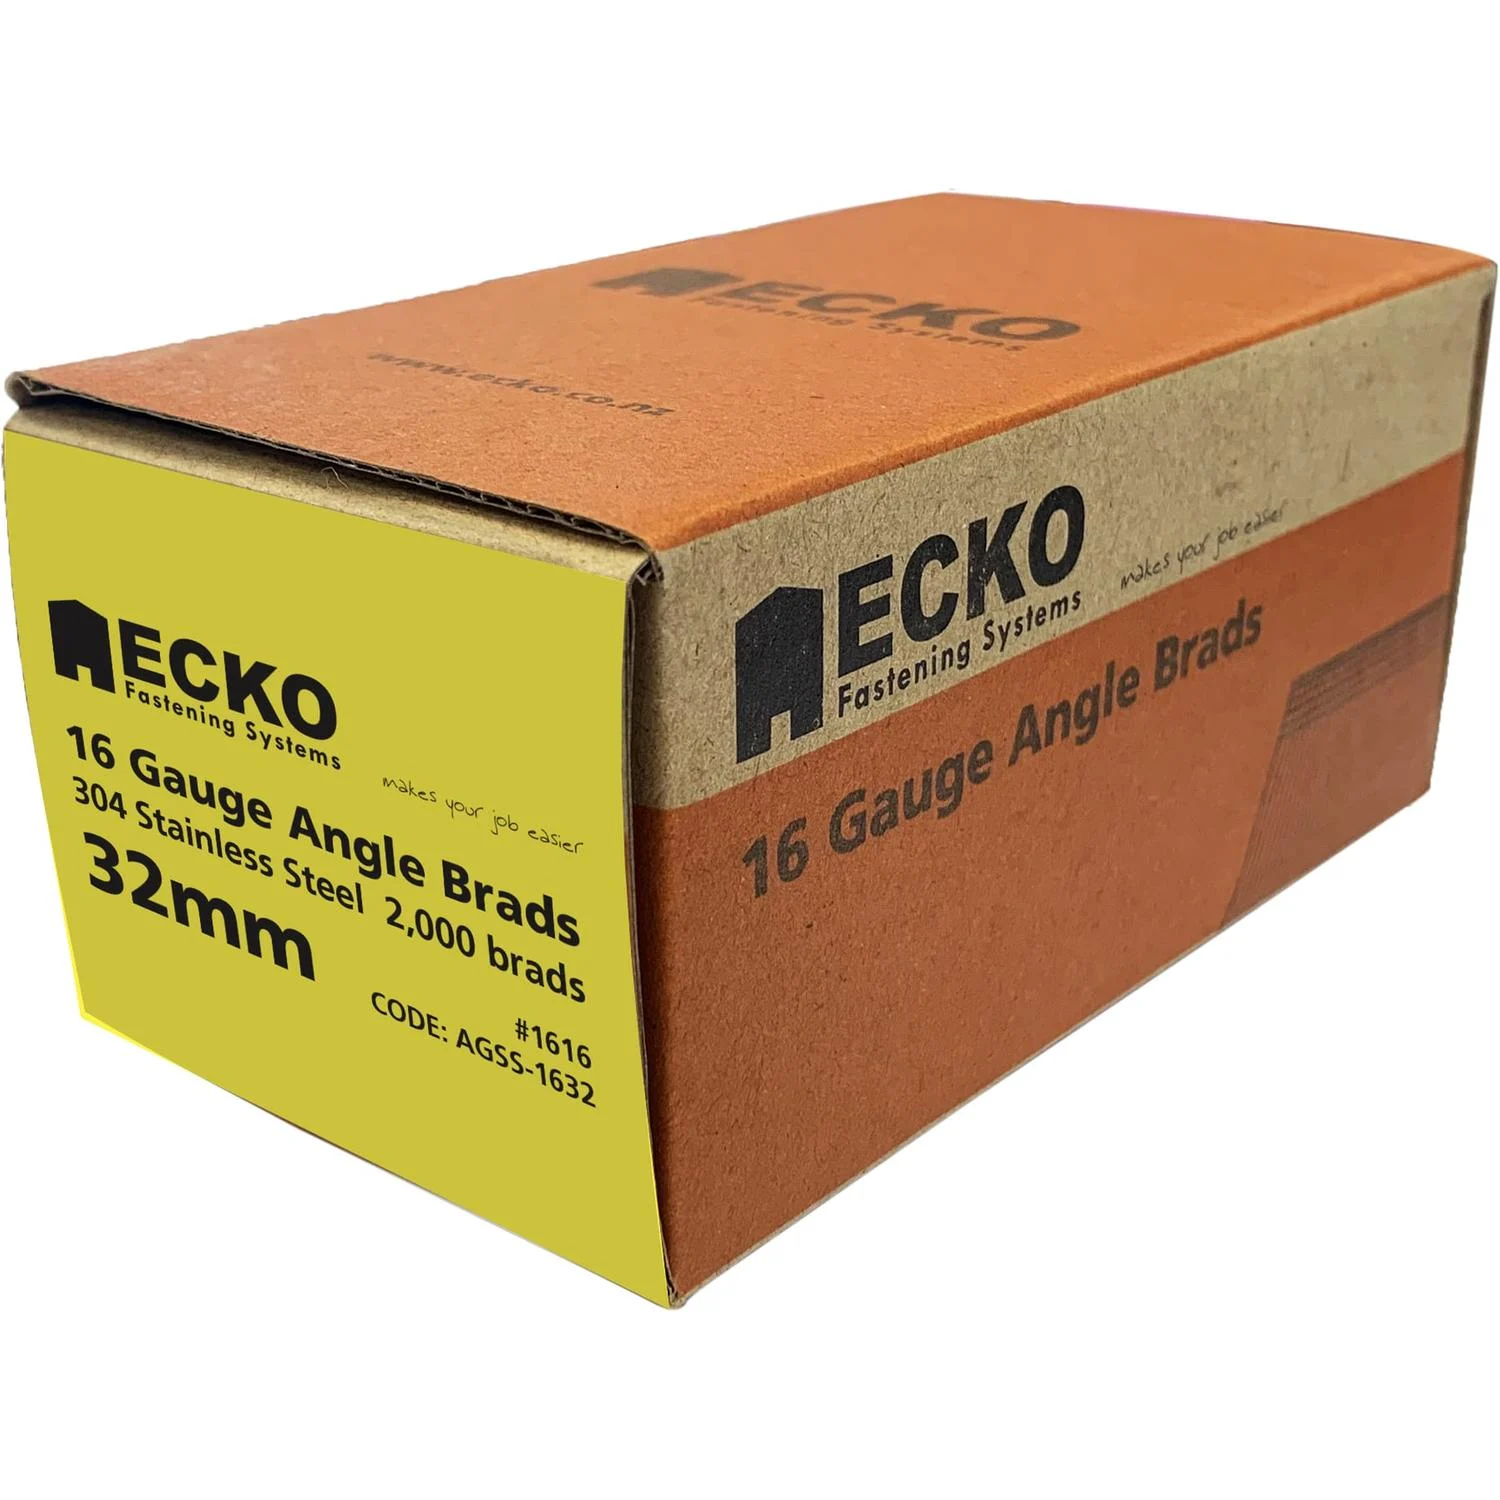 Ecko 16 Gauge Angle Brads Gasless Pack 32 X 1.6Mm 304 Stainless Steel (2000)